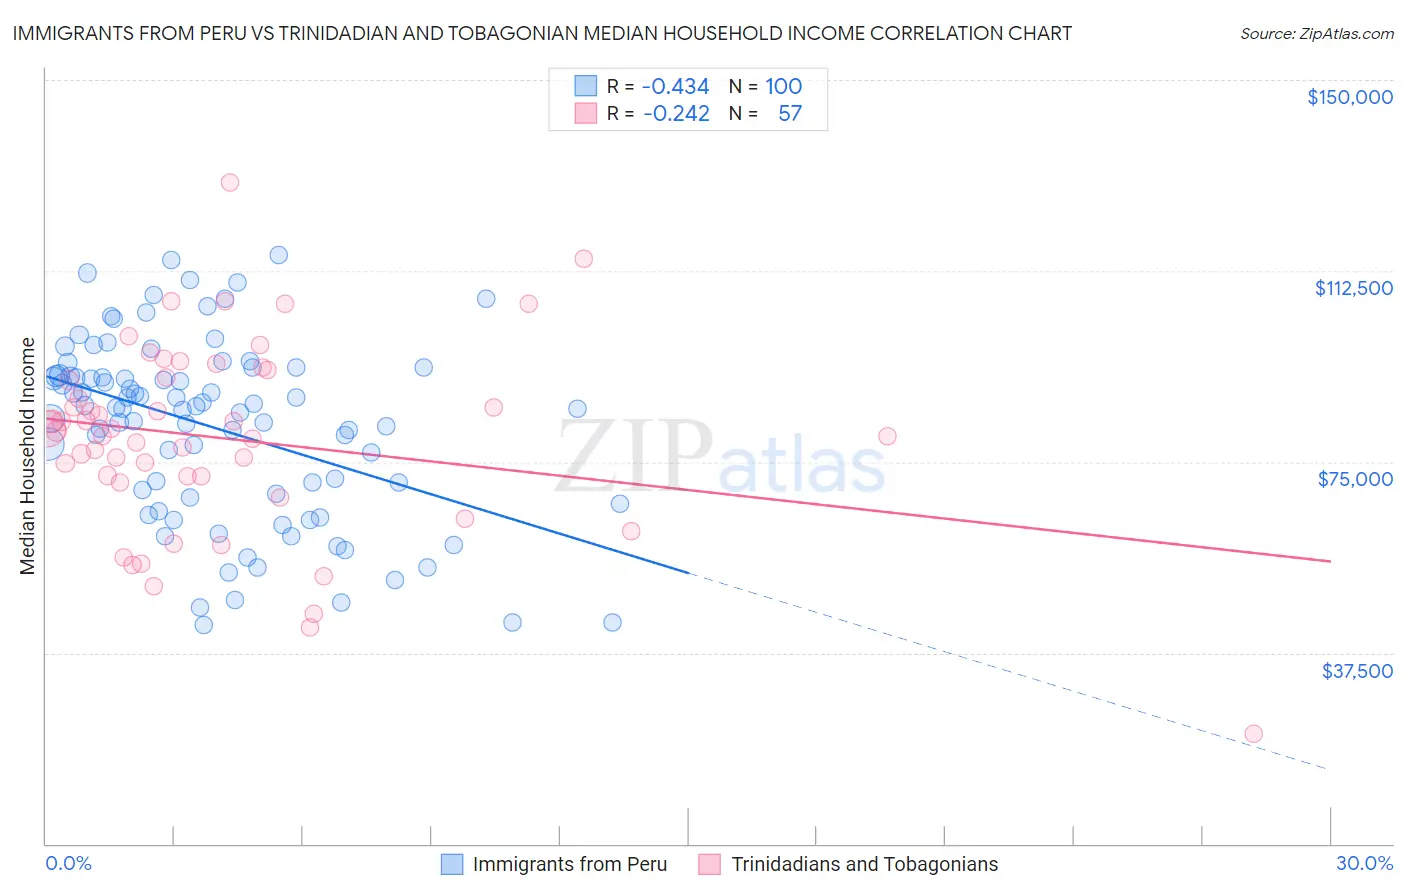 Immigrants from Peru vs Trinidadian and Tobagonian Median Household Income